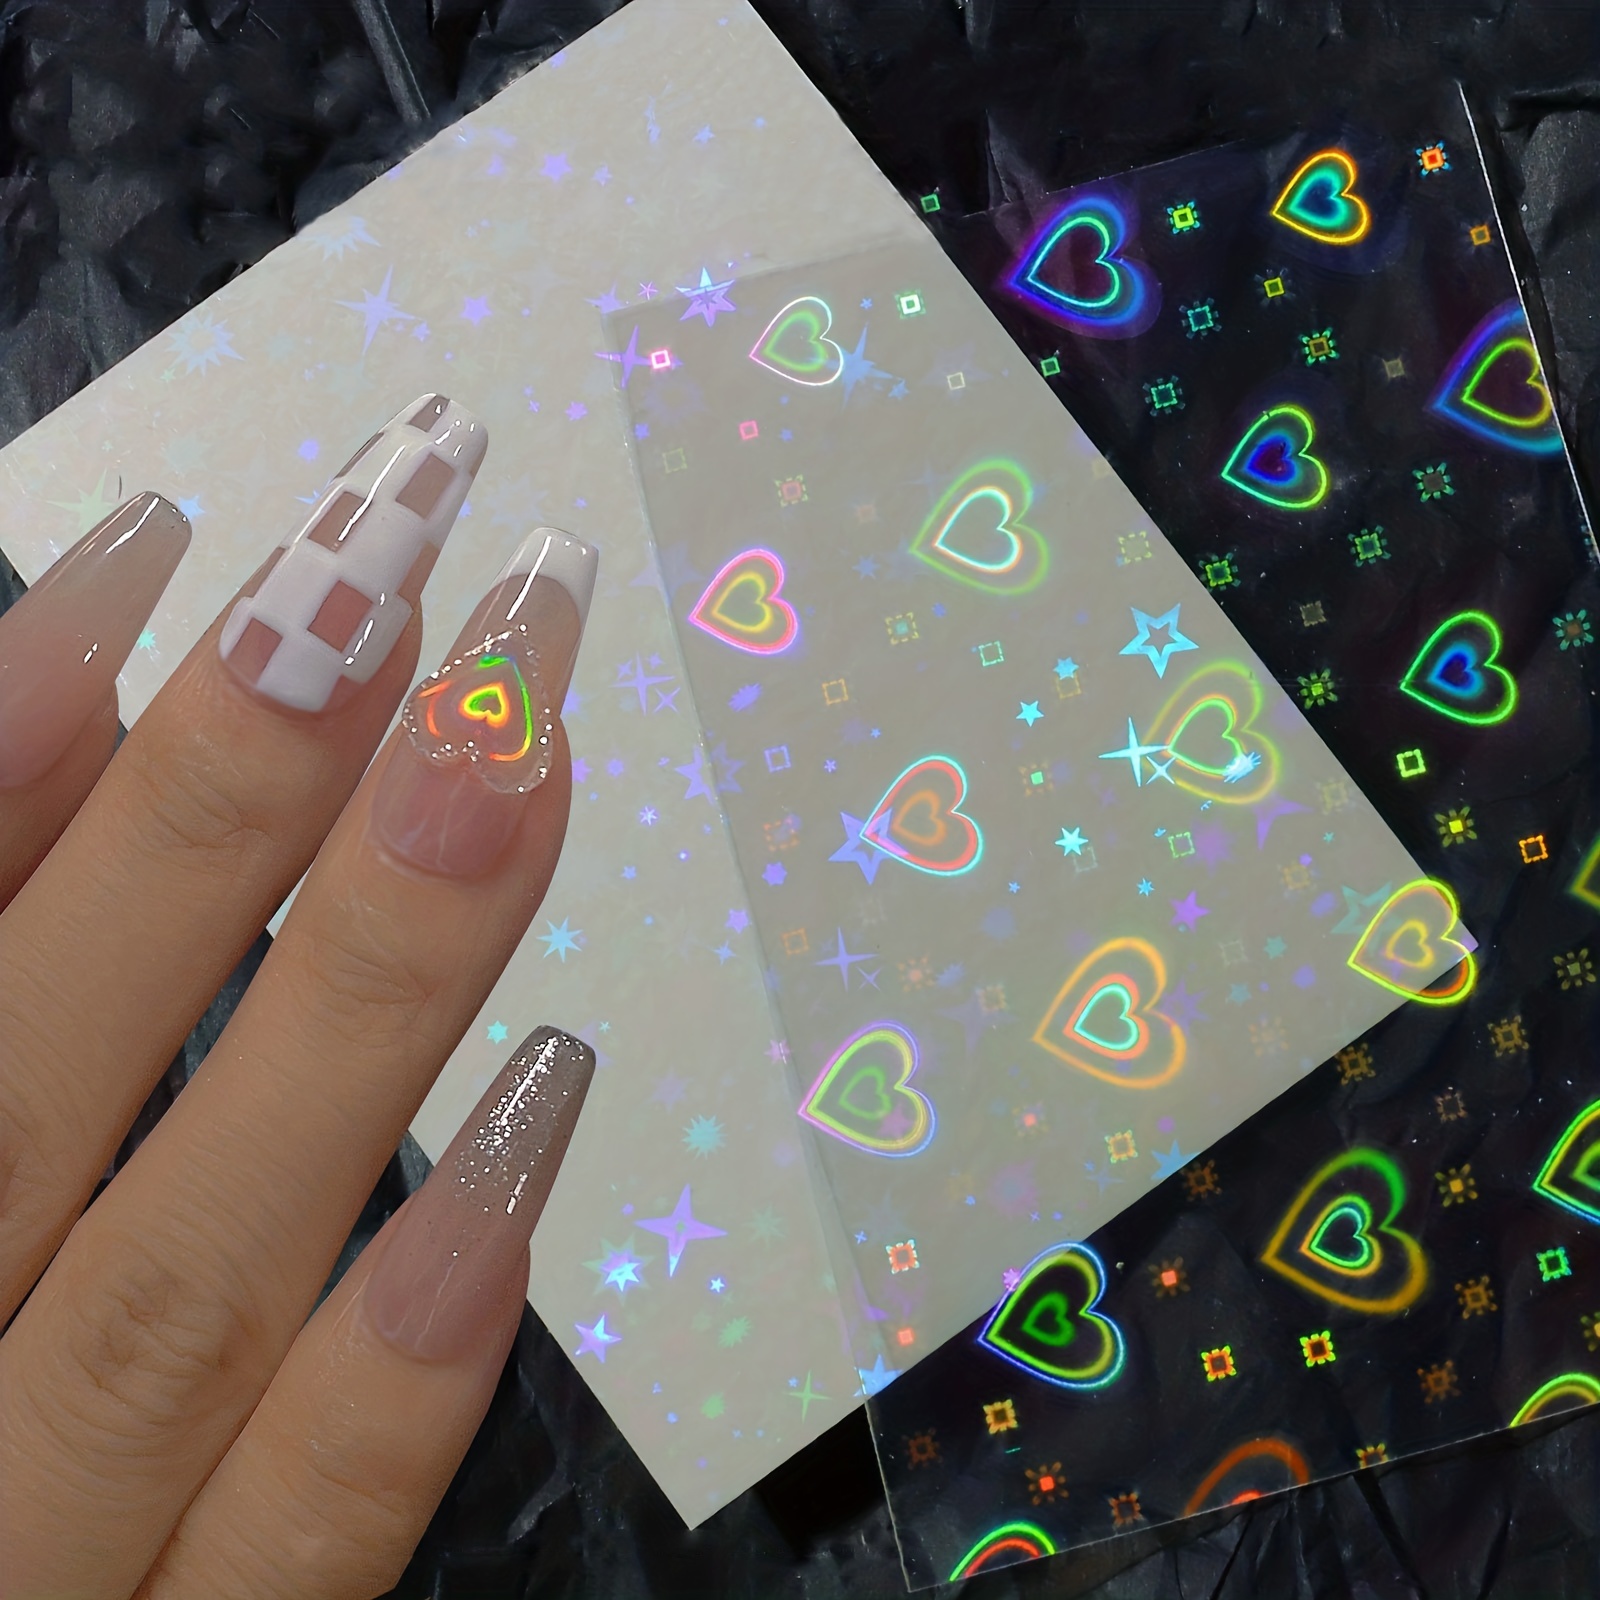 LV NAIL ART STICKER - SILVER HOLOGRAPHIC